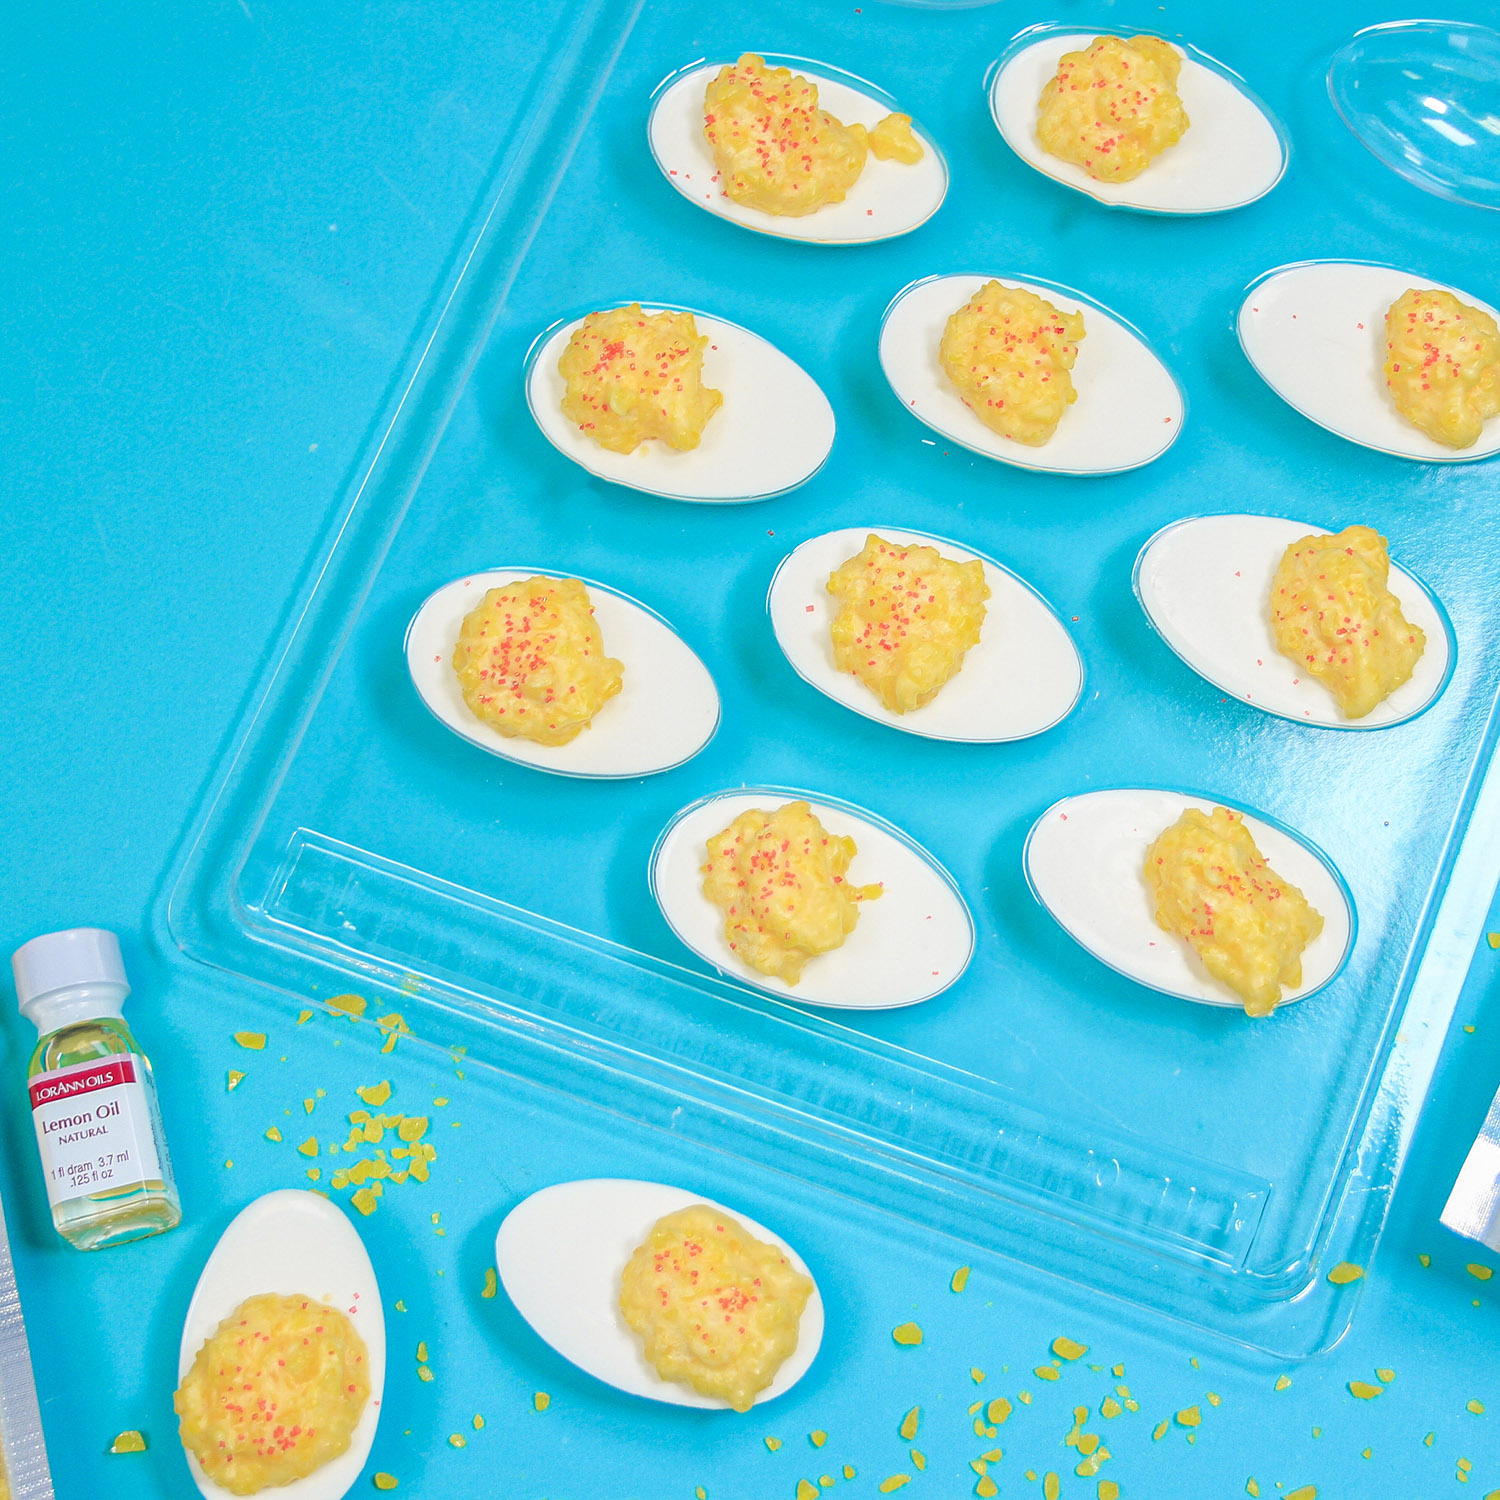 April Fools Deviled Eggs made with candy coating, lemon crunch and red sanding sugar.